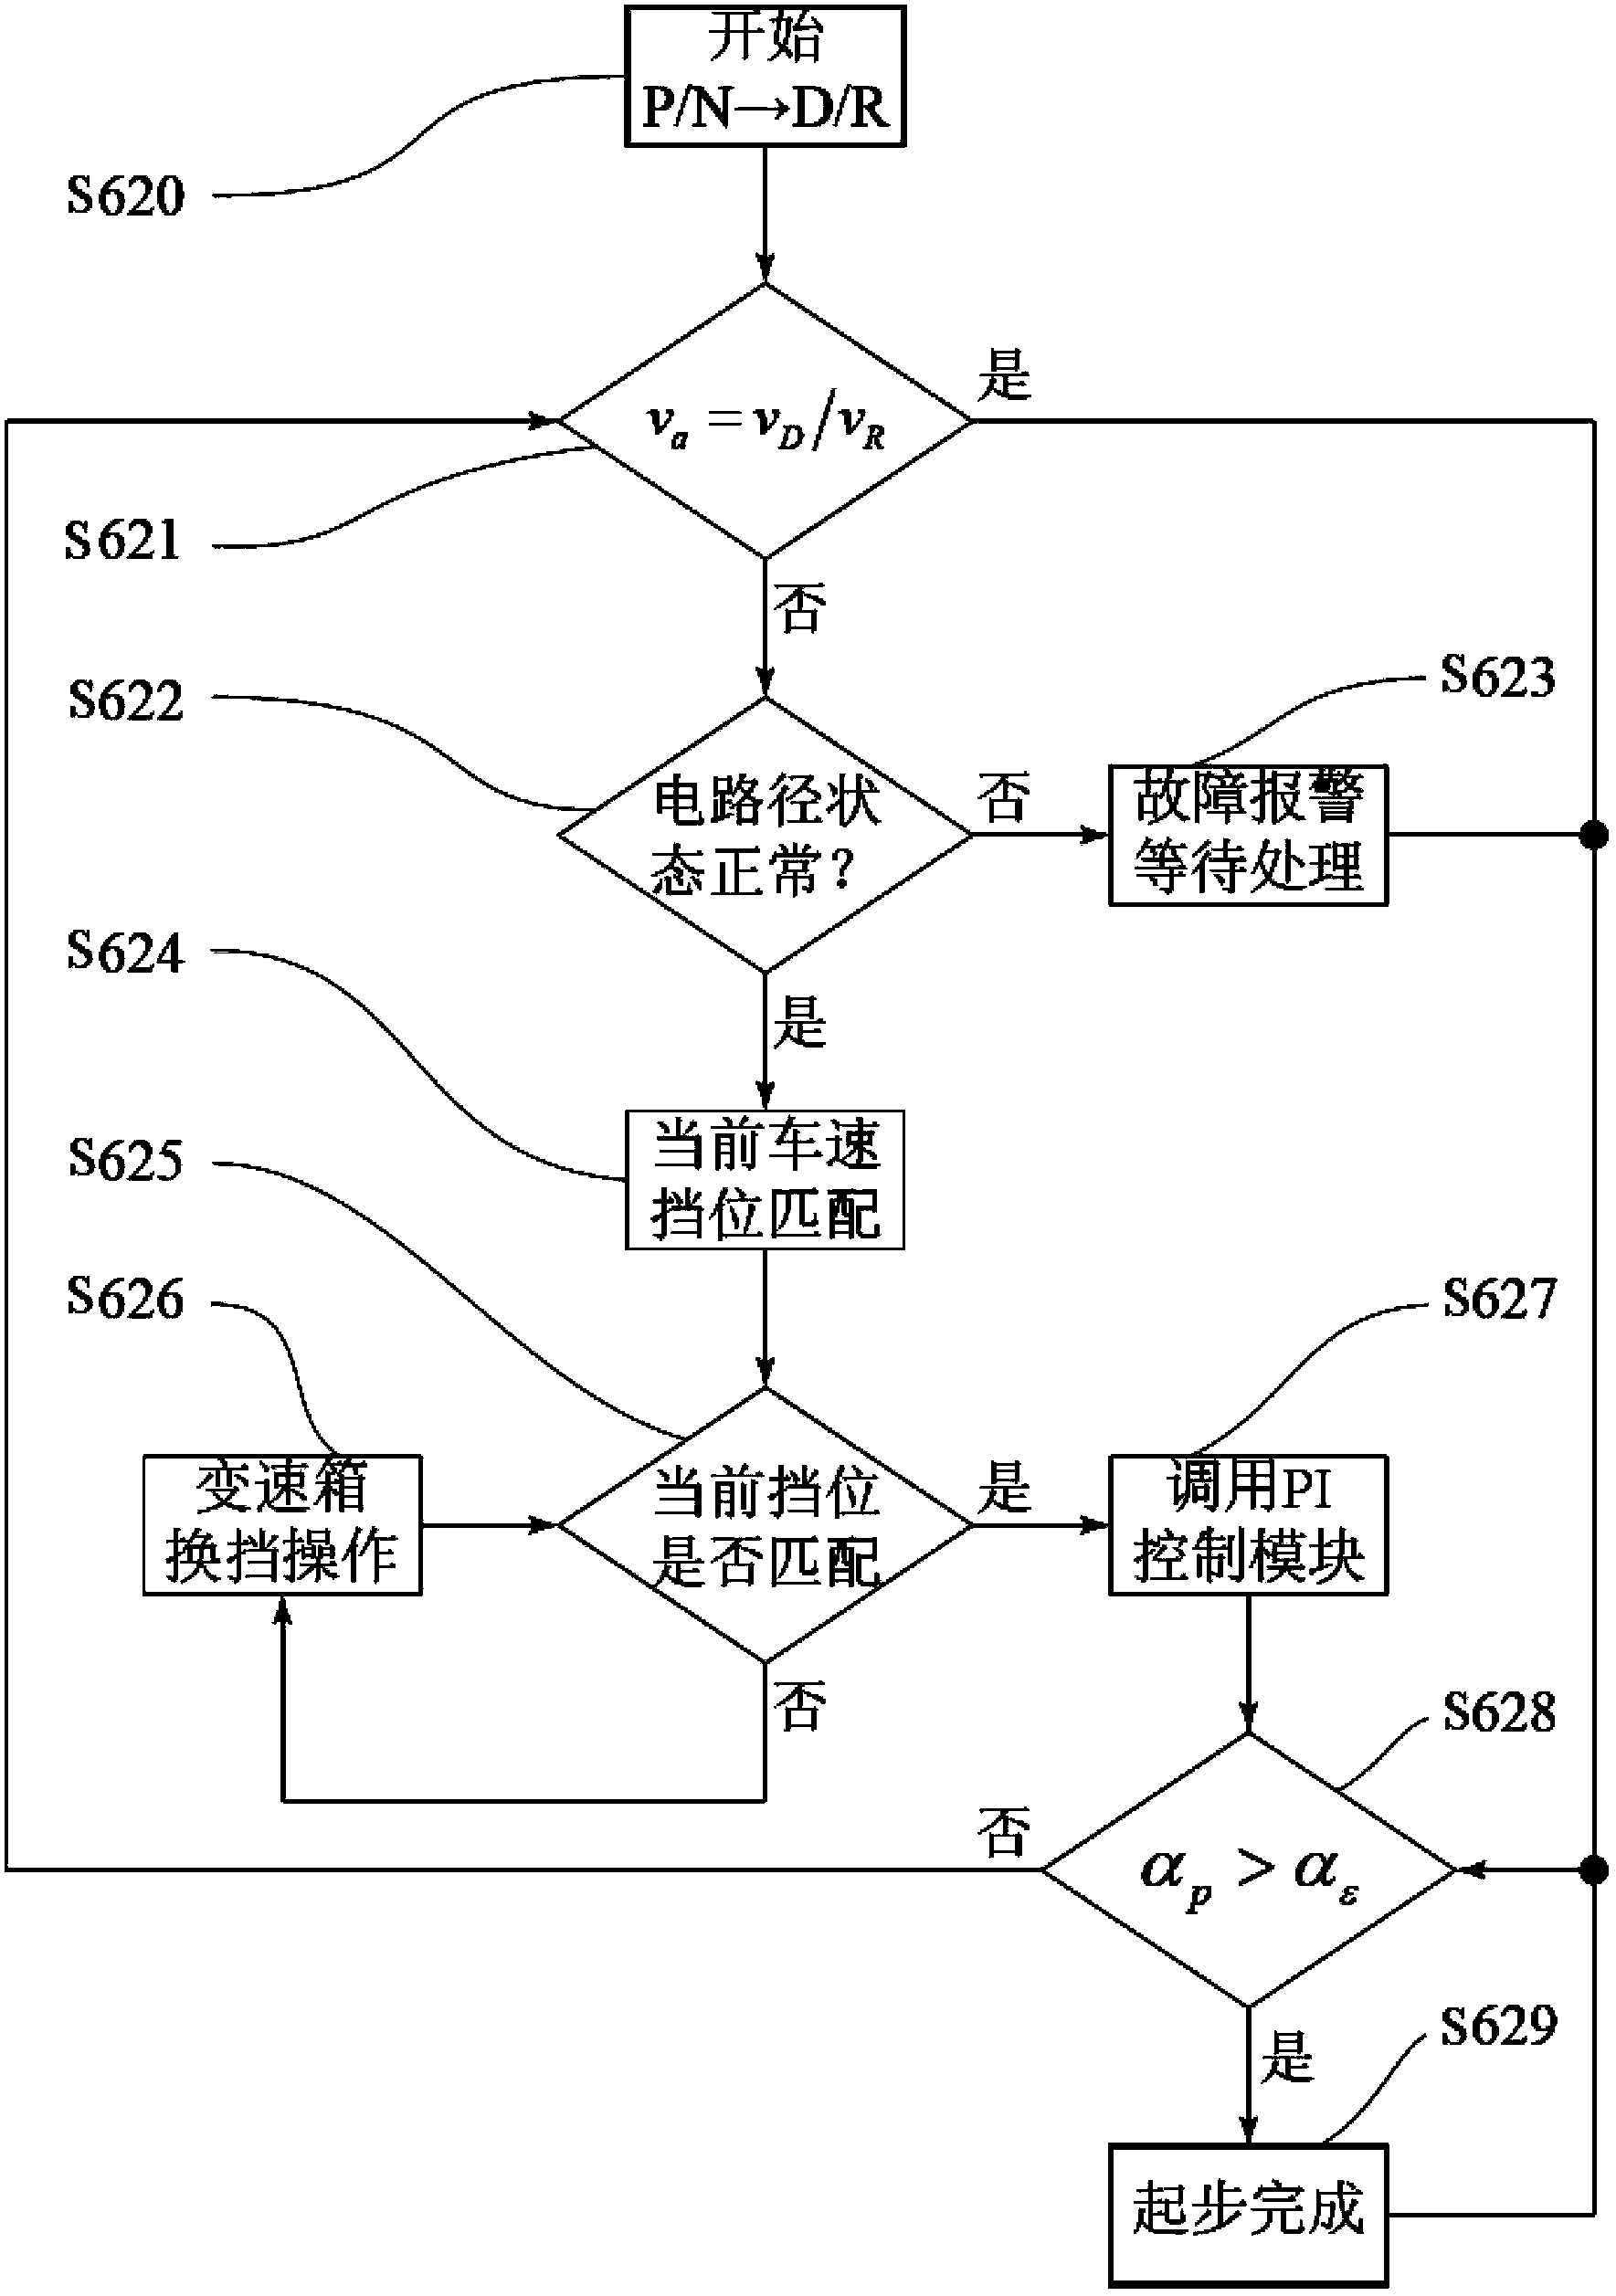 Controlling method for electric car